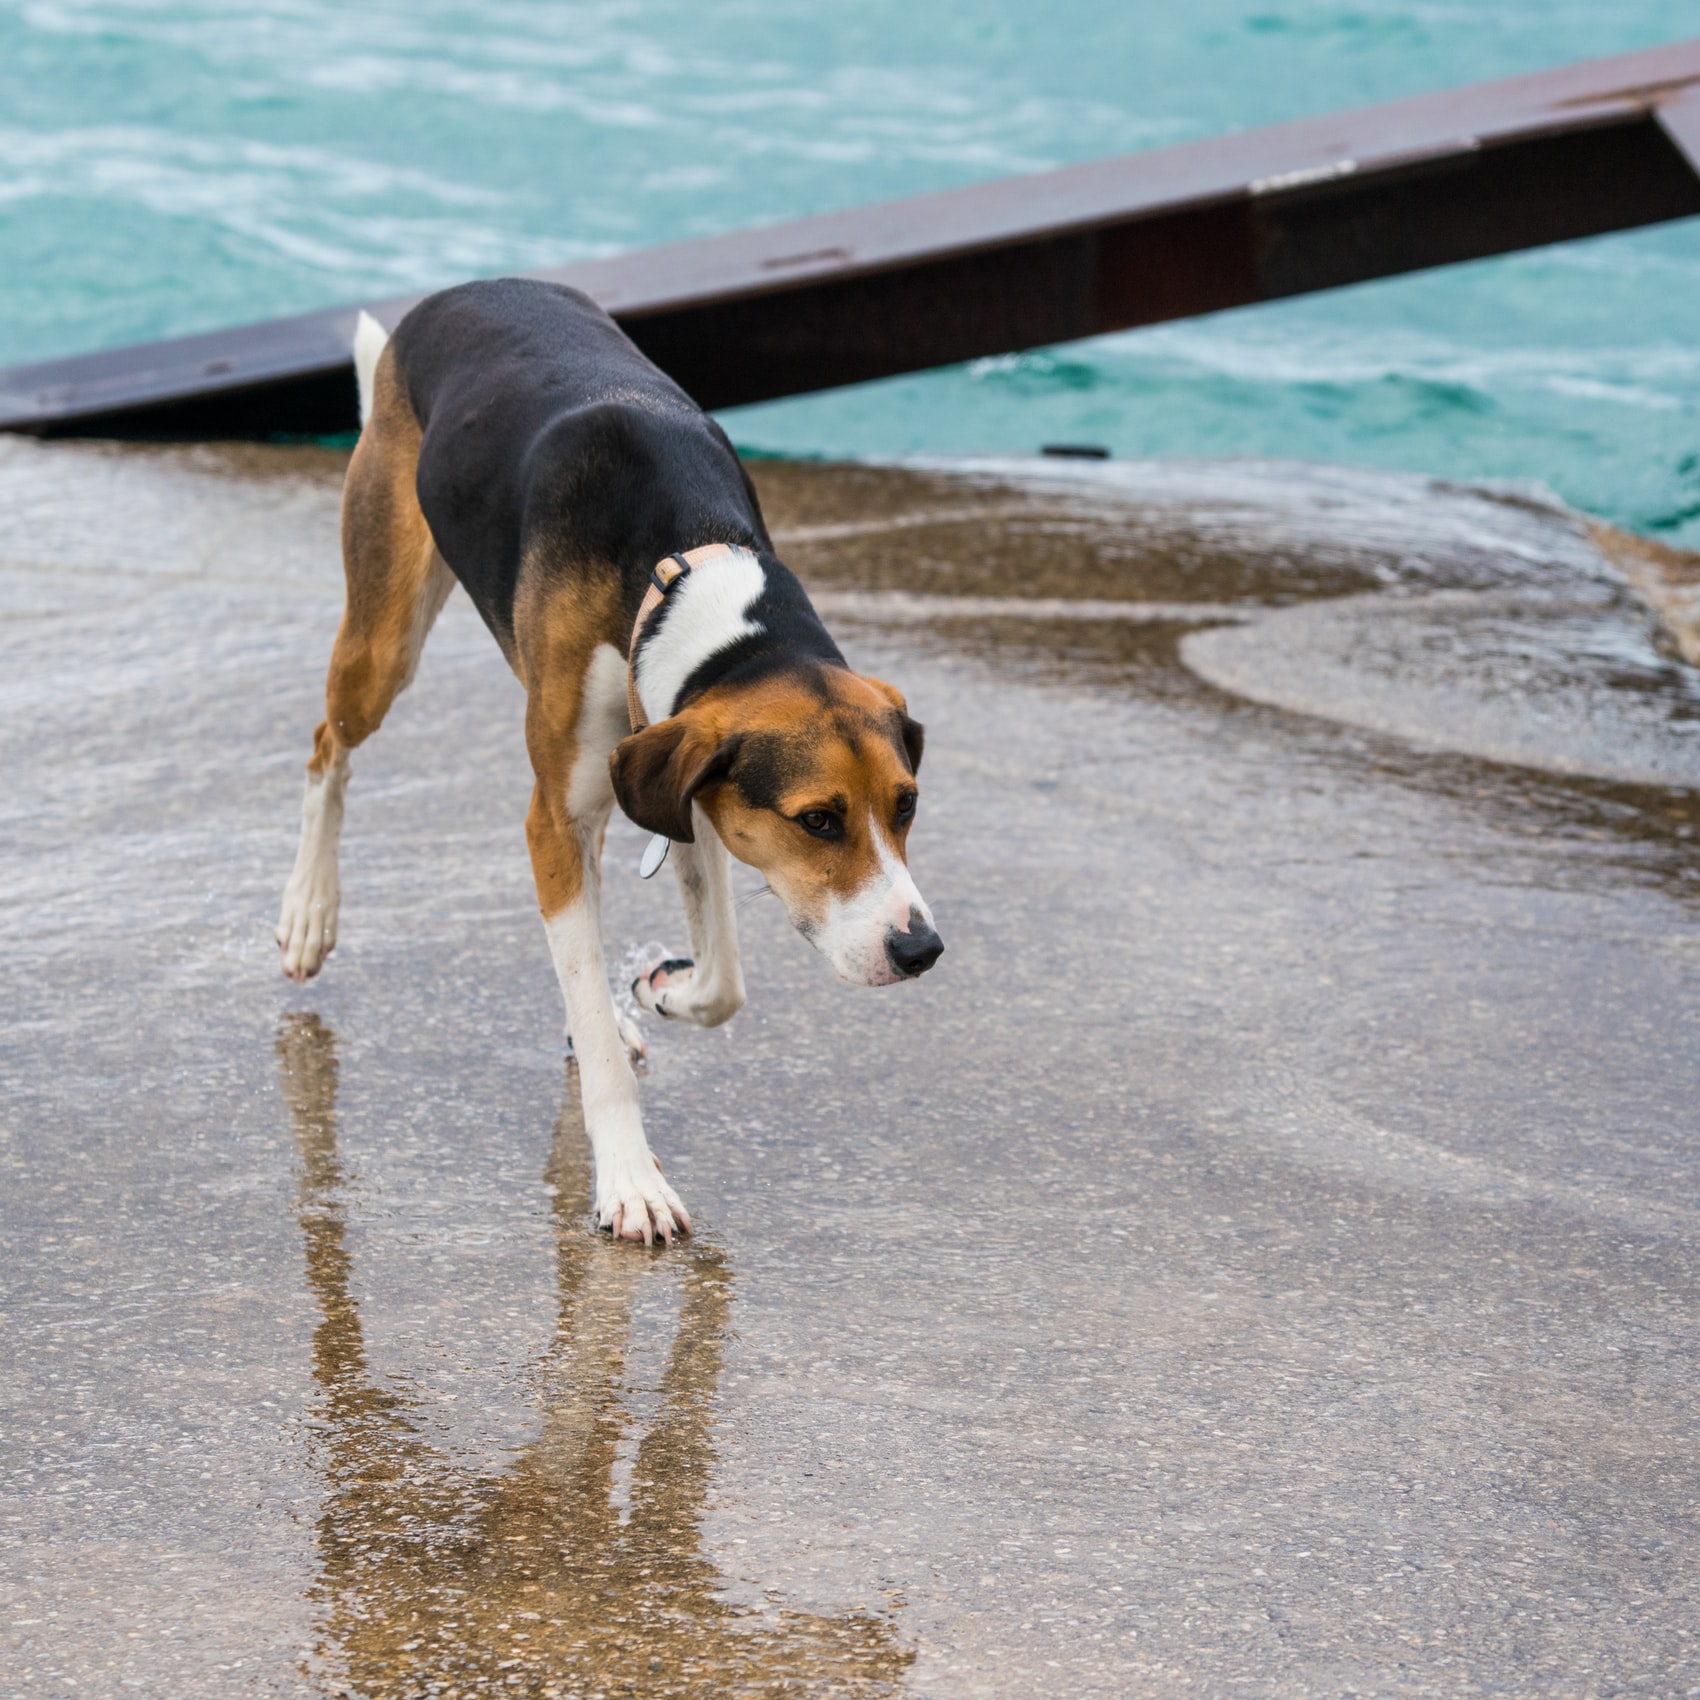 A Beagle walking on a wet pavement by the beach